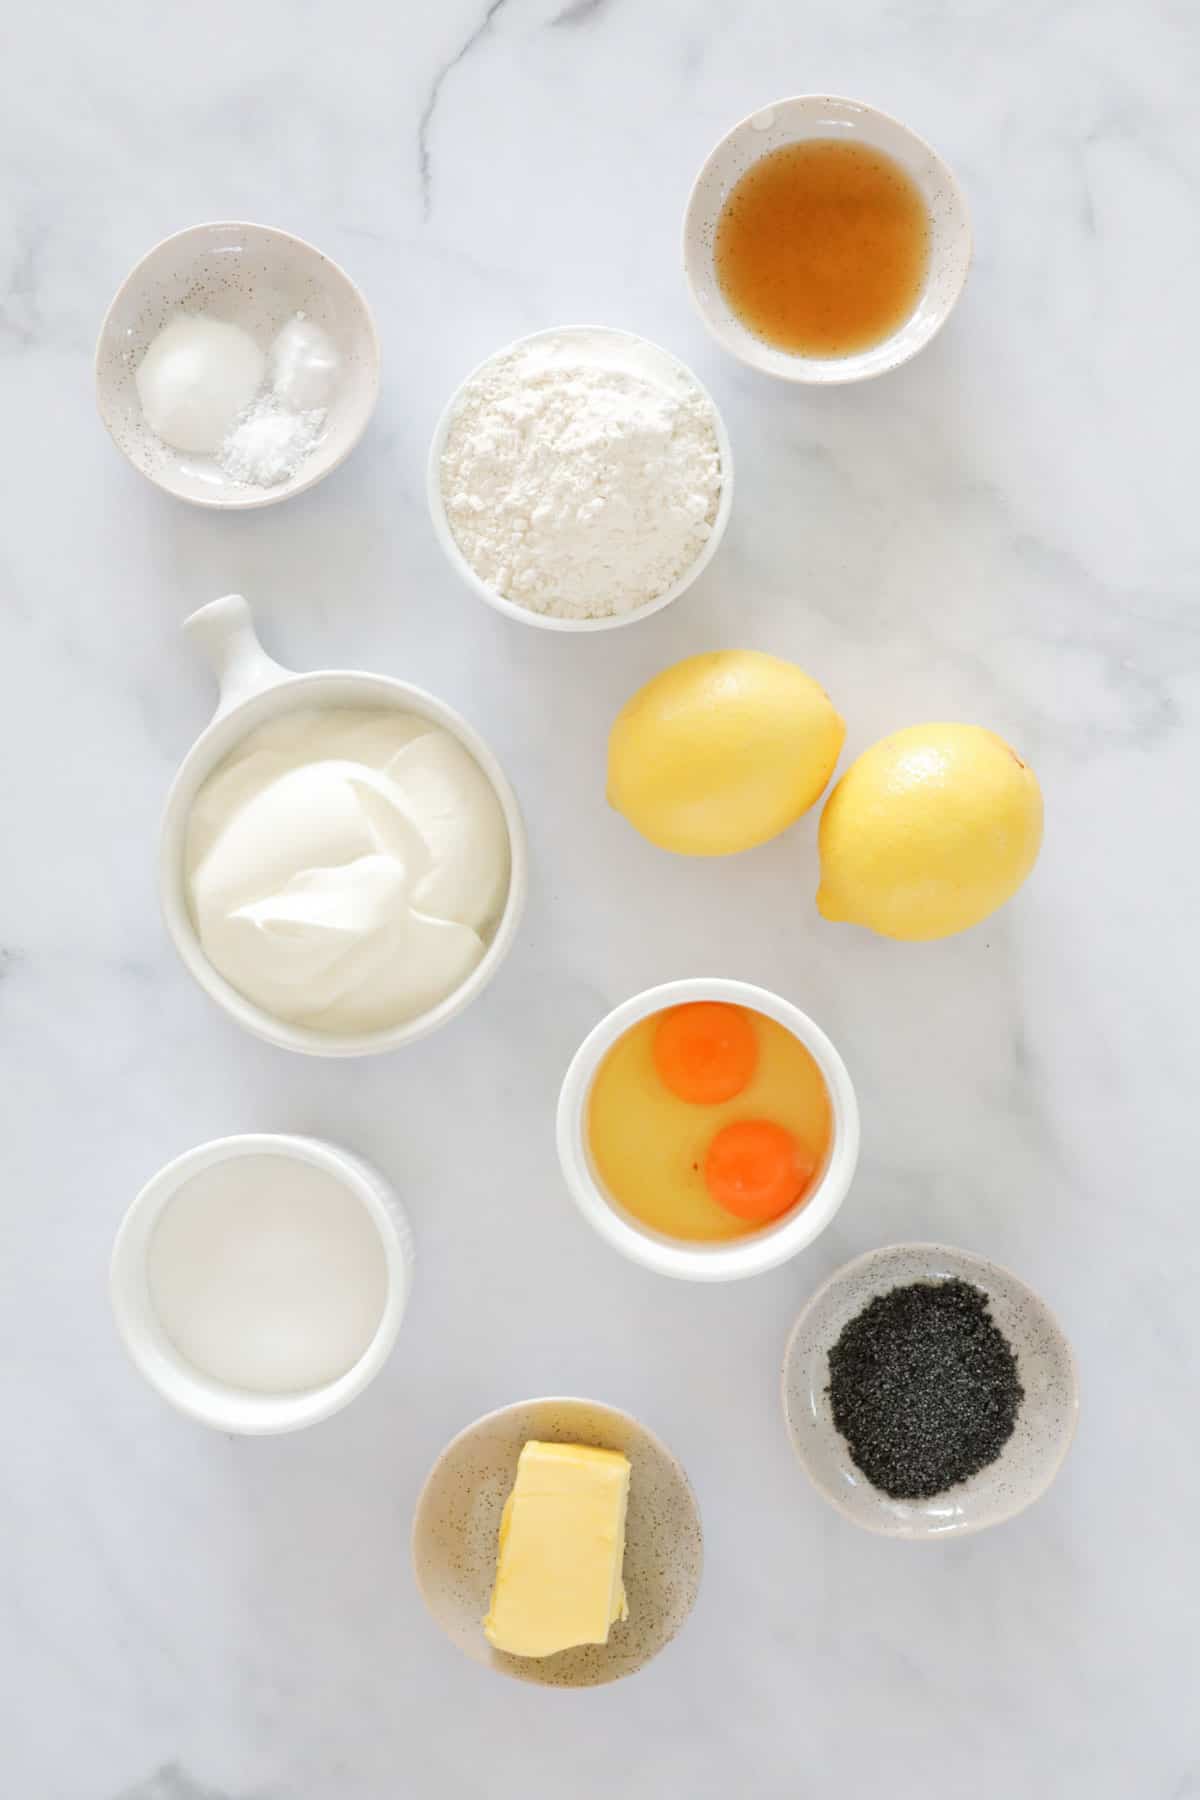 The ingredients needed to make lemon poppy seed muffins.